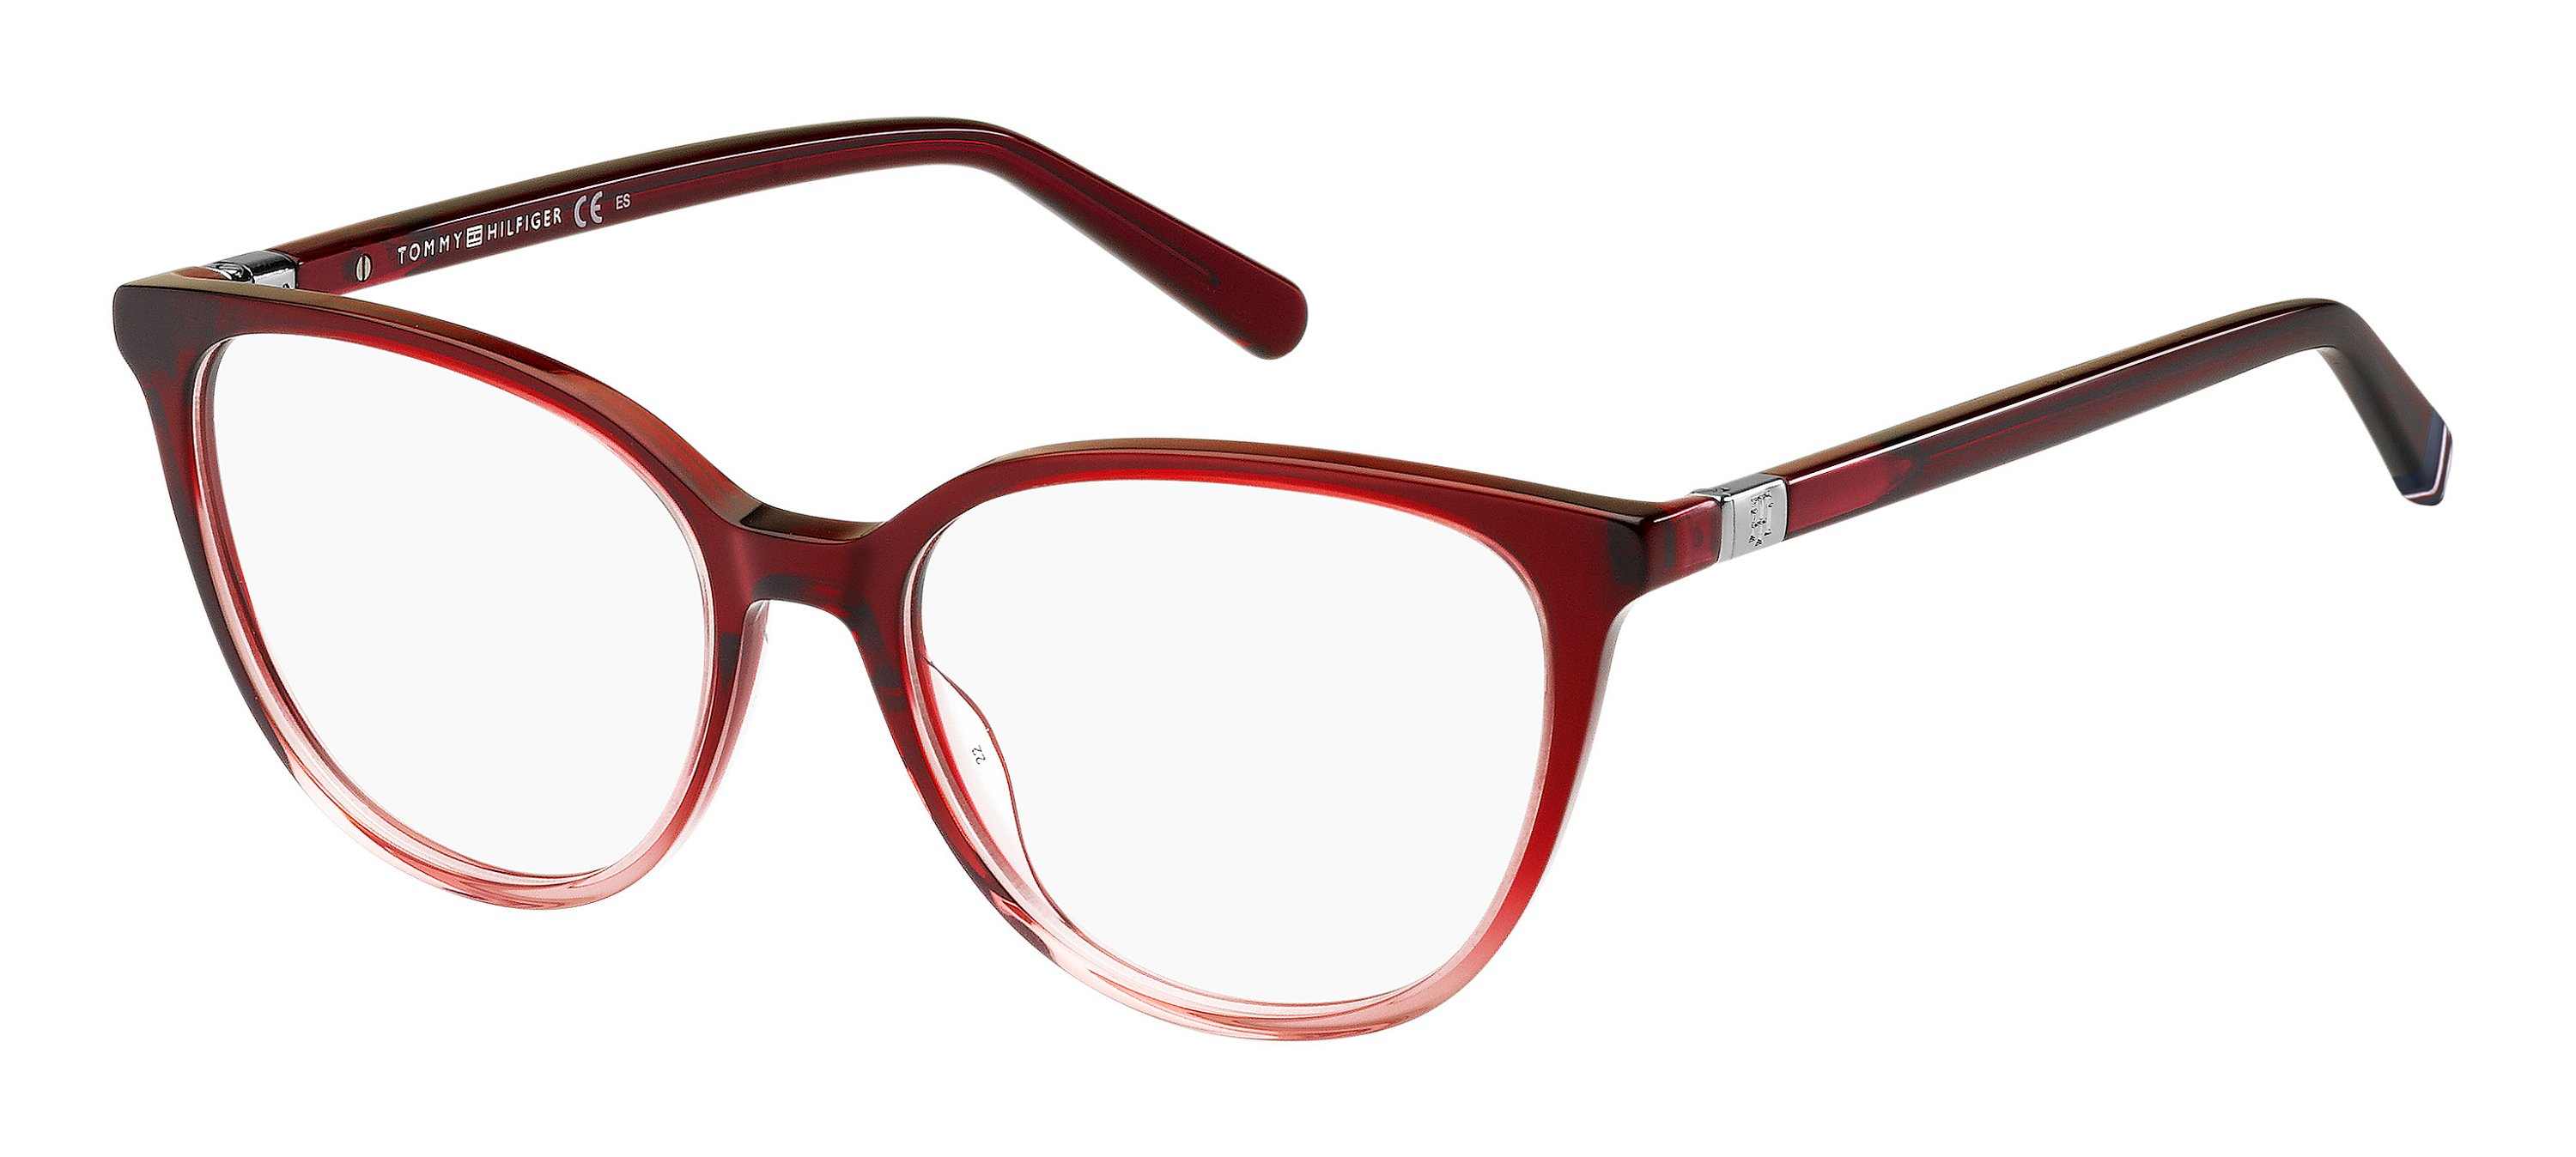 Tommy Hilfiger Brille TH1964 C9A 53 rot